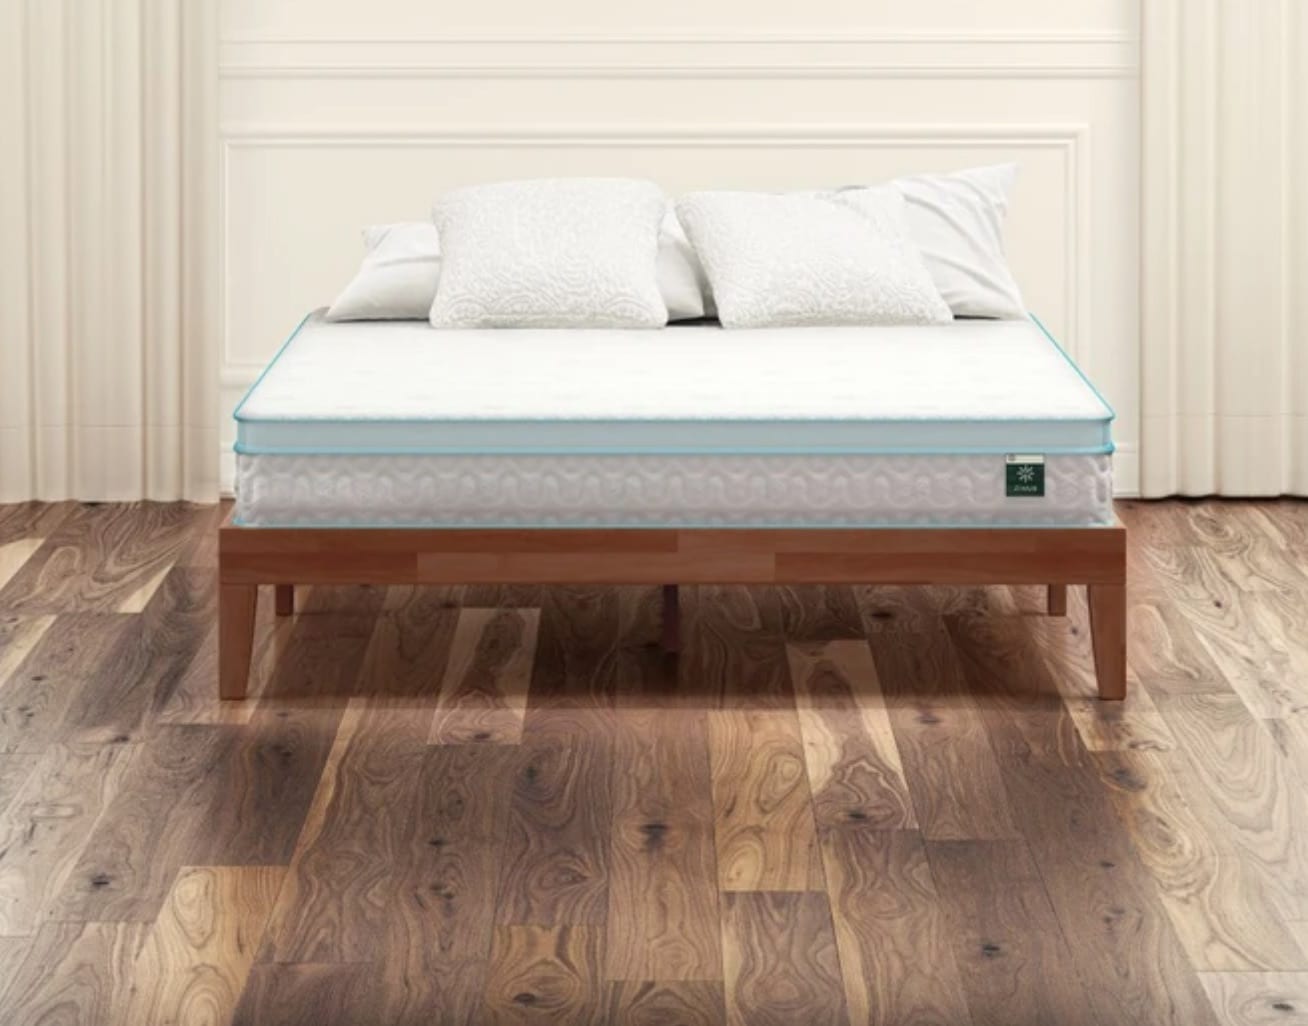 Product page image of the Zinus Mint Green Hybrid Mattress